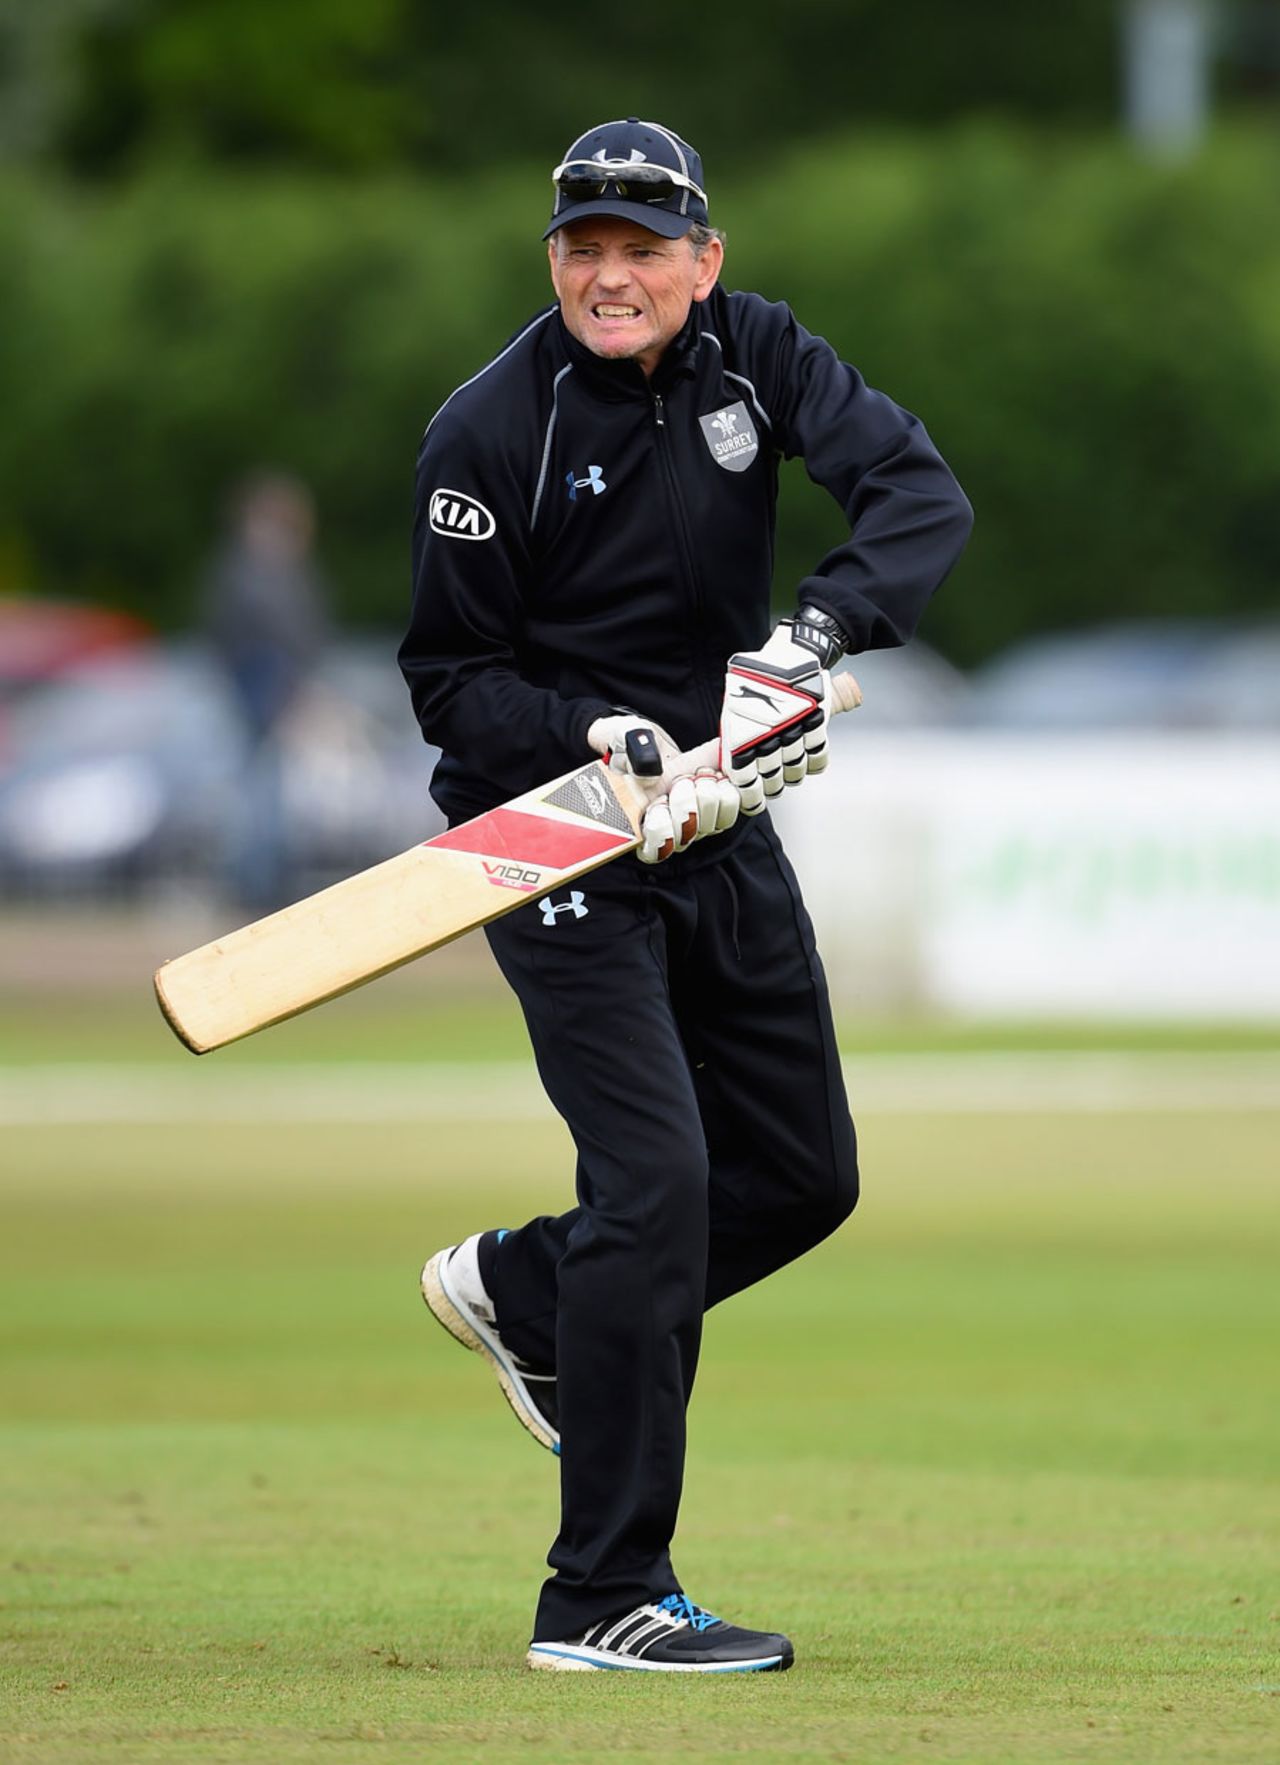 Graham Ford leads a coaching drill, Derbyshire v Surrey, County Championship, Division Two, Derby, 2nd day, June 22, 2015